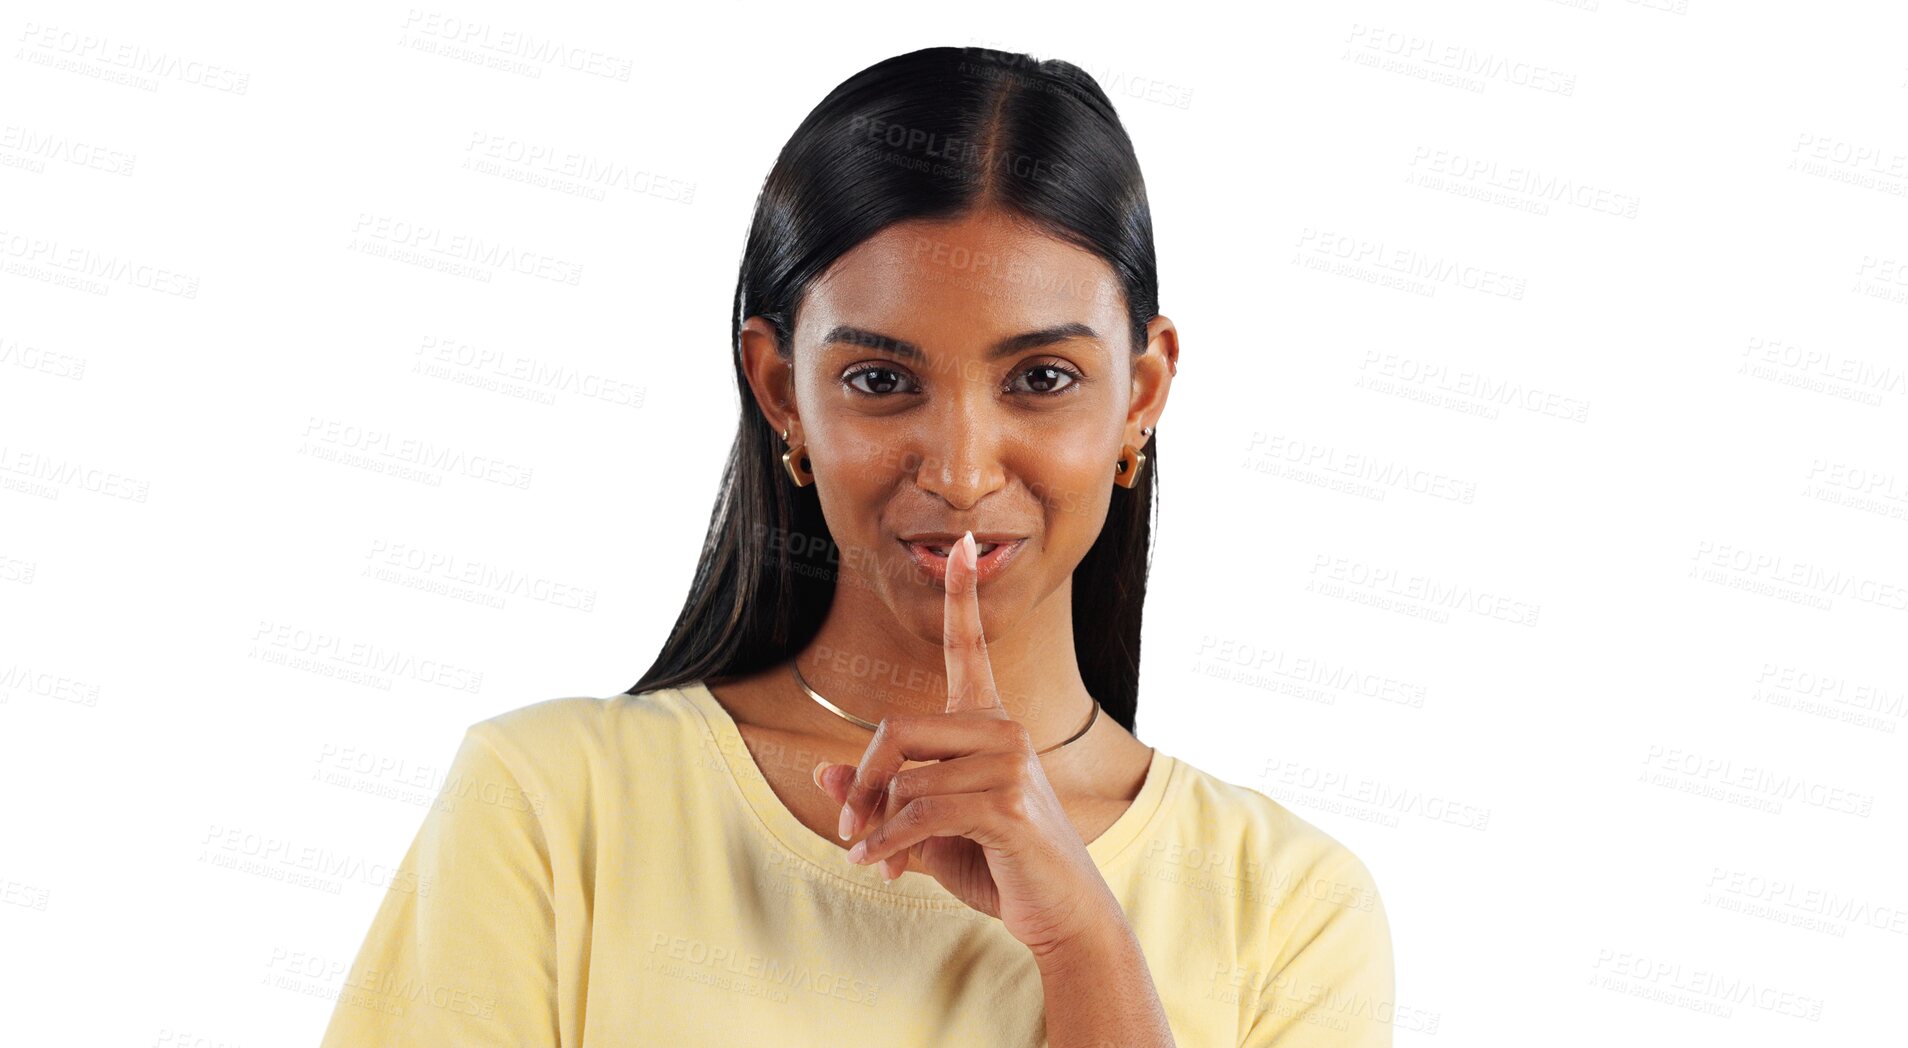 Buy stock photo Secret, portrait and woman with finger on lips to whisper in transparent, isolated or png background. Happy, girl and person gesture to shush for privacy of drama, news and emoji for gossip story